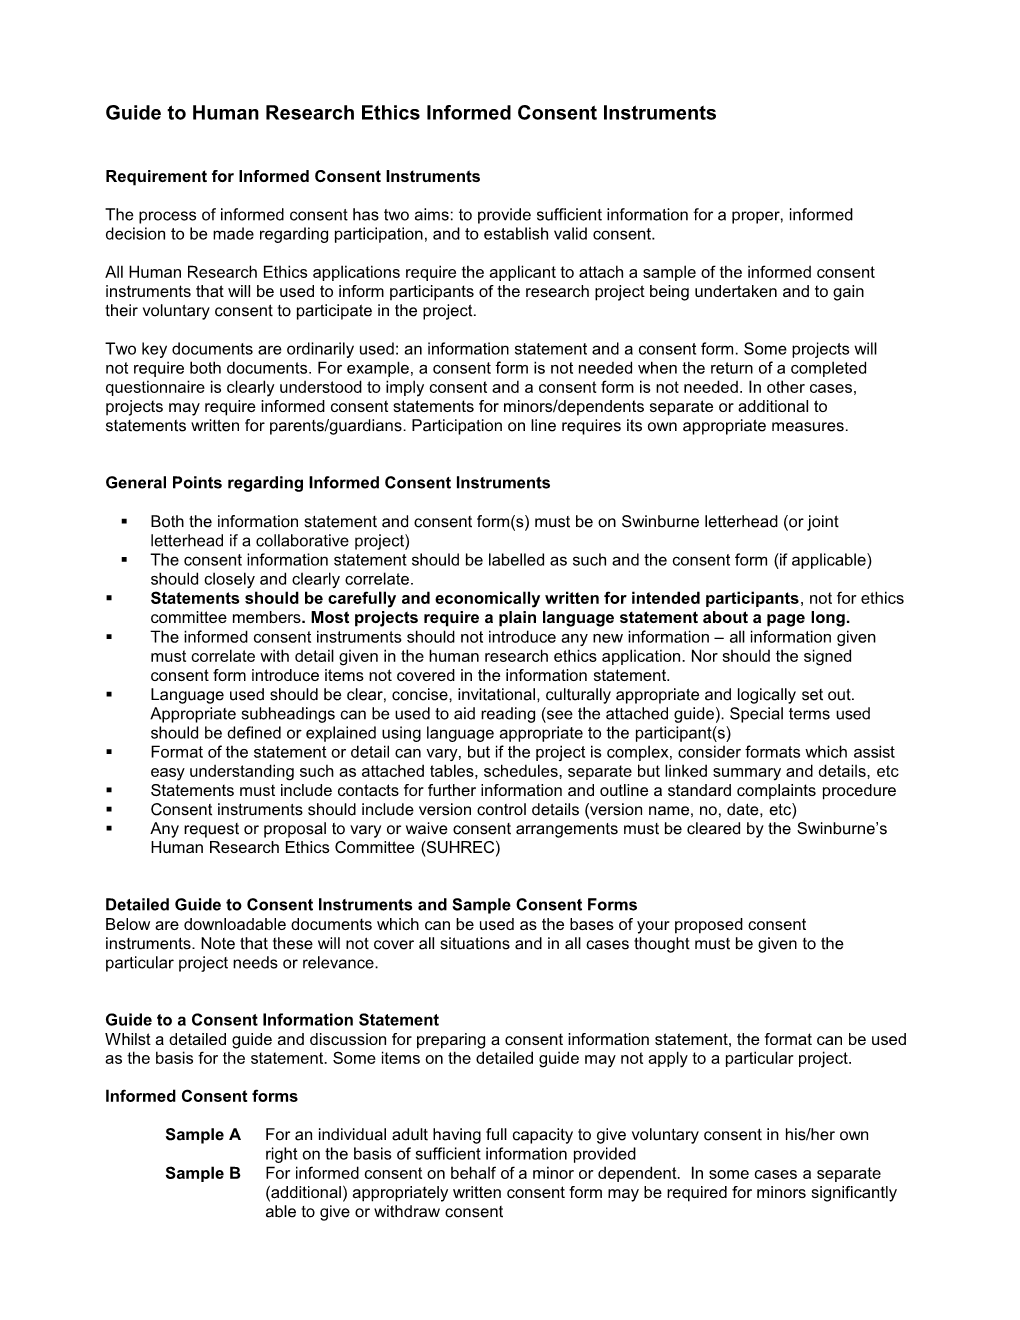 Informed Consent Instruments - Swinburne Research Ethics